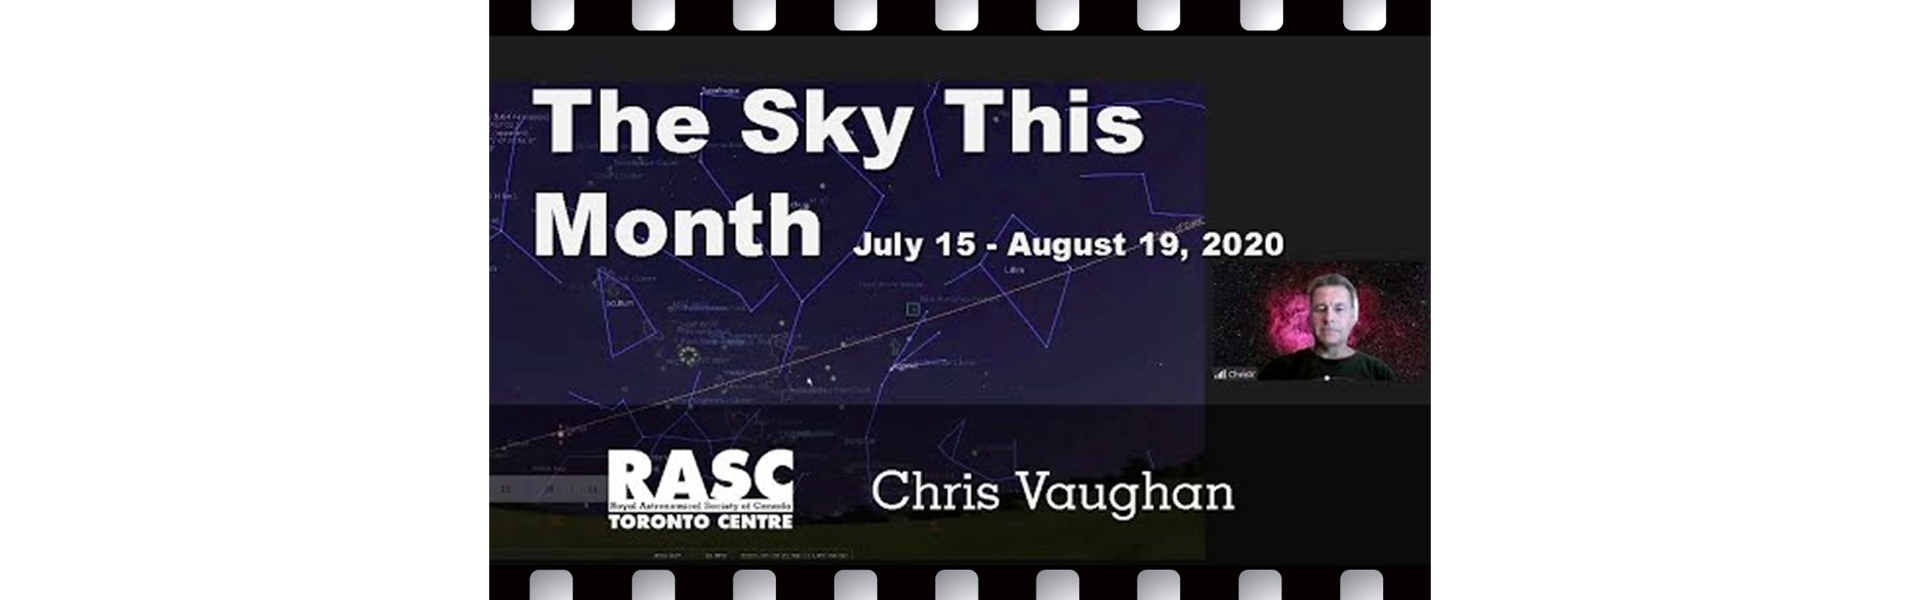 The Sky This Month July 15 - August 19, 2020